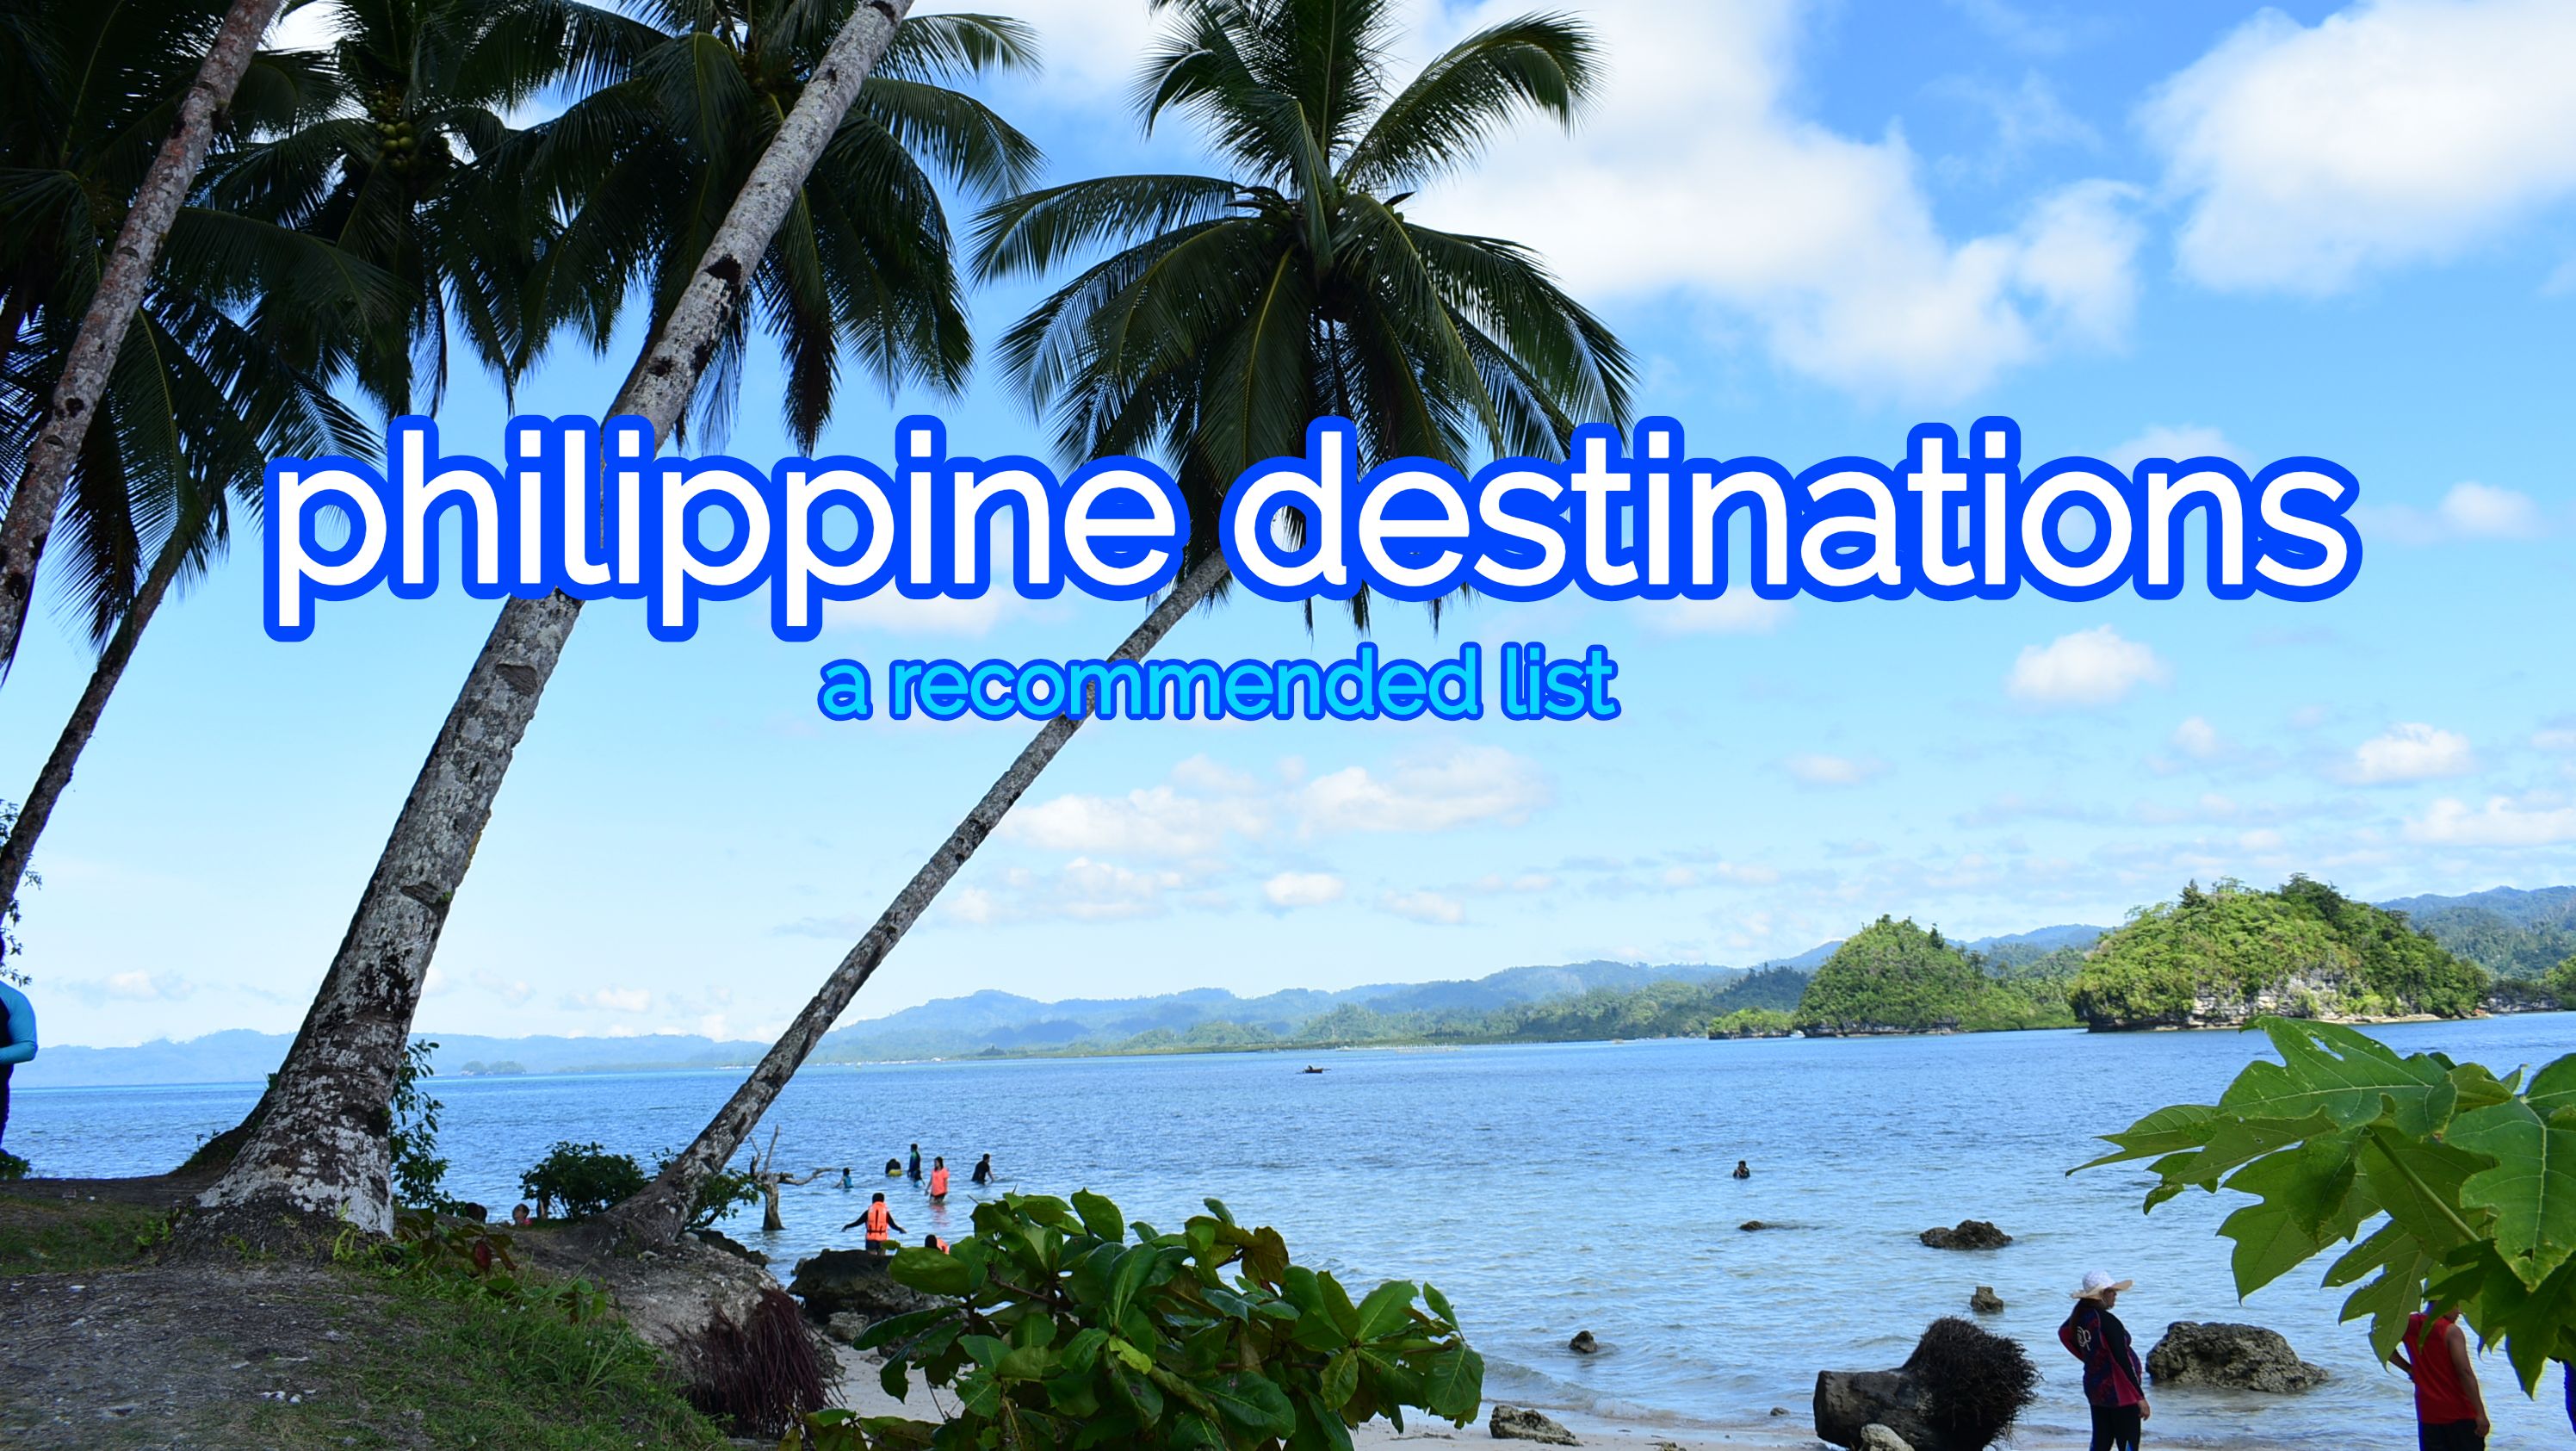 Are These The Best Places To Visit In The Philippines?